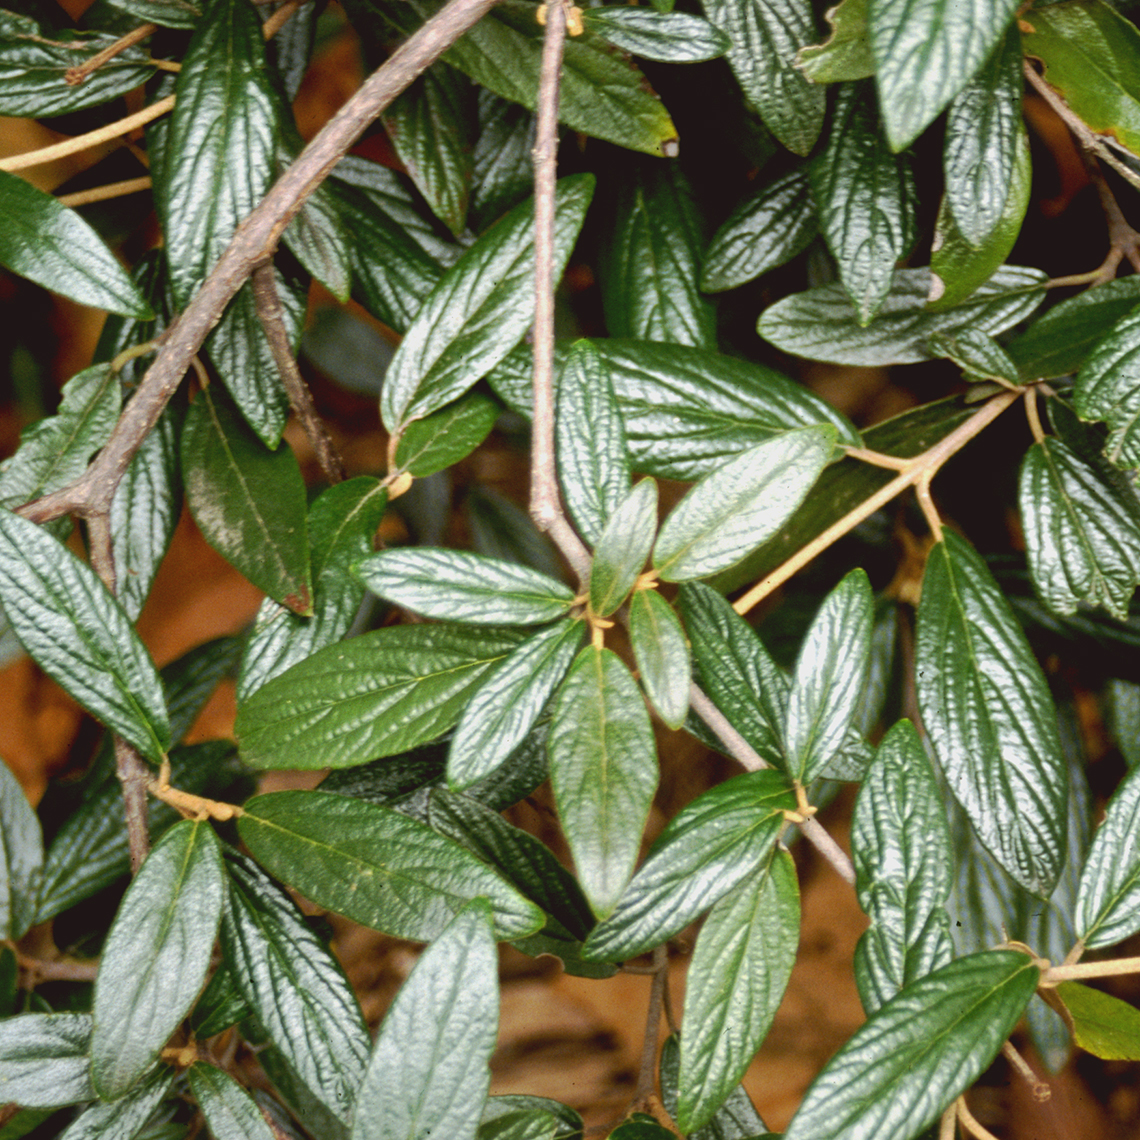 Closeup of the leathery textured green foliage of Decker viburnum